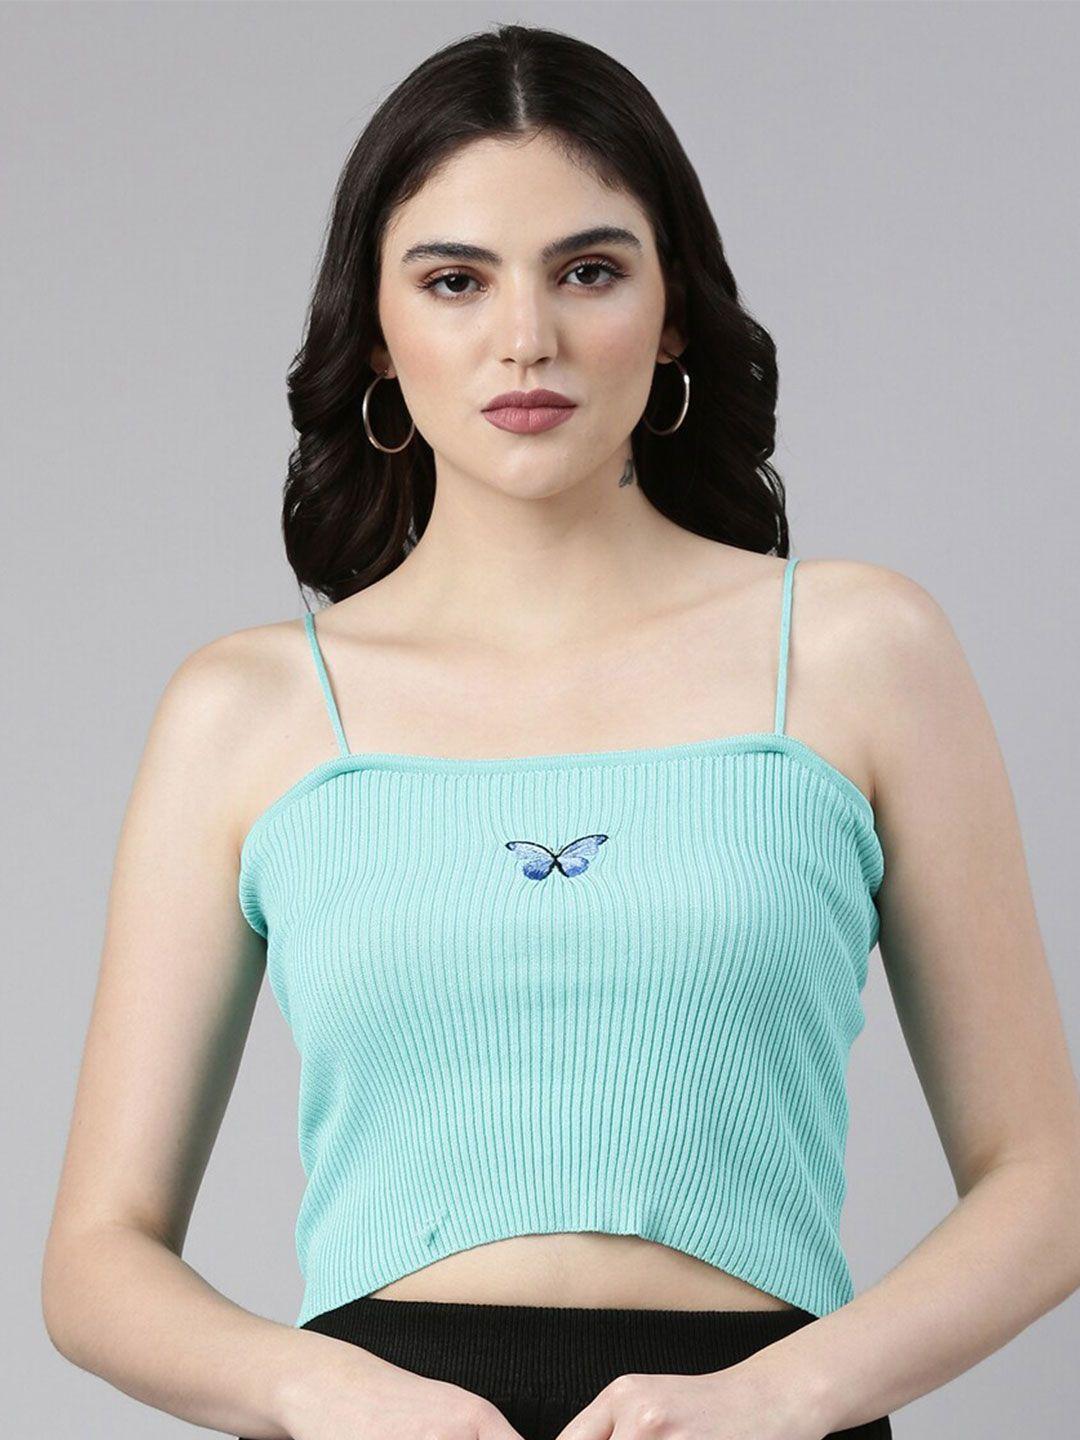 showoff striped acrylic shoulder straps fitted crop top